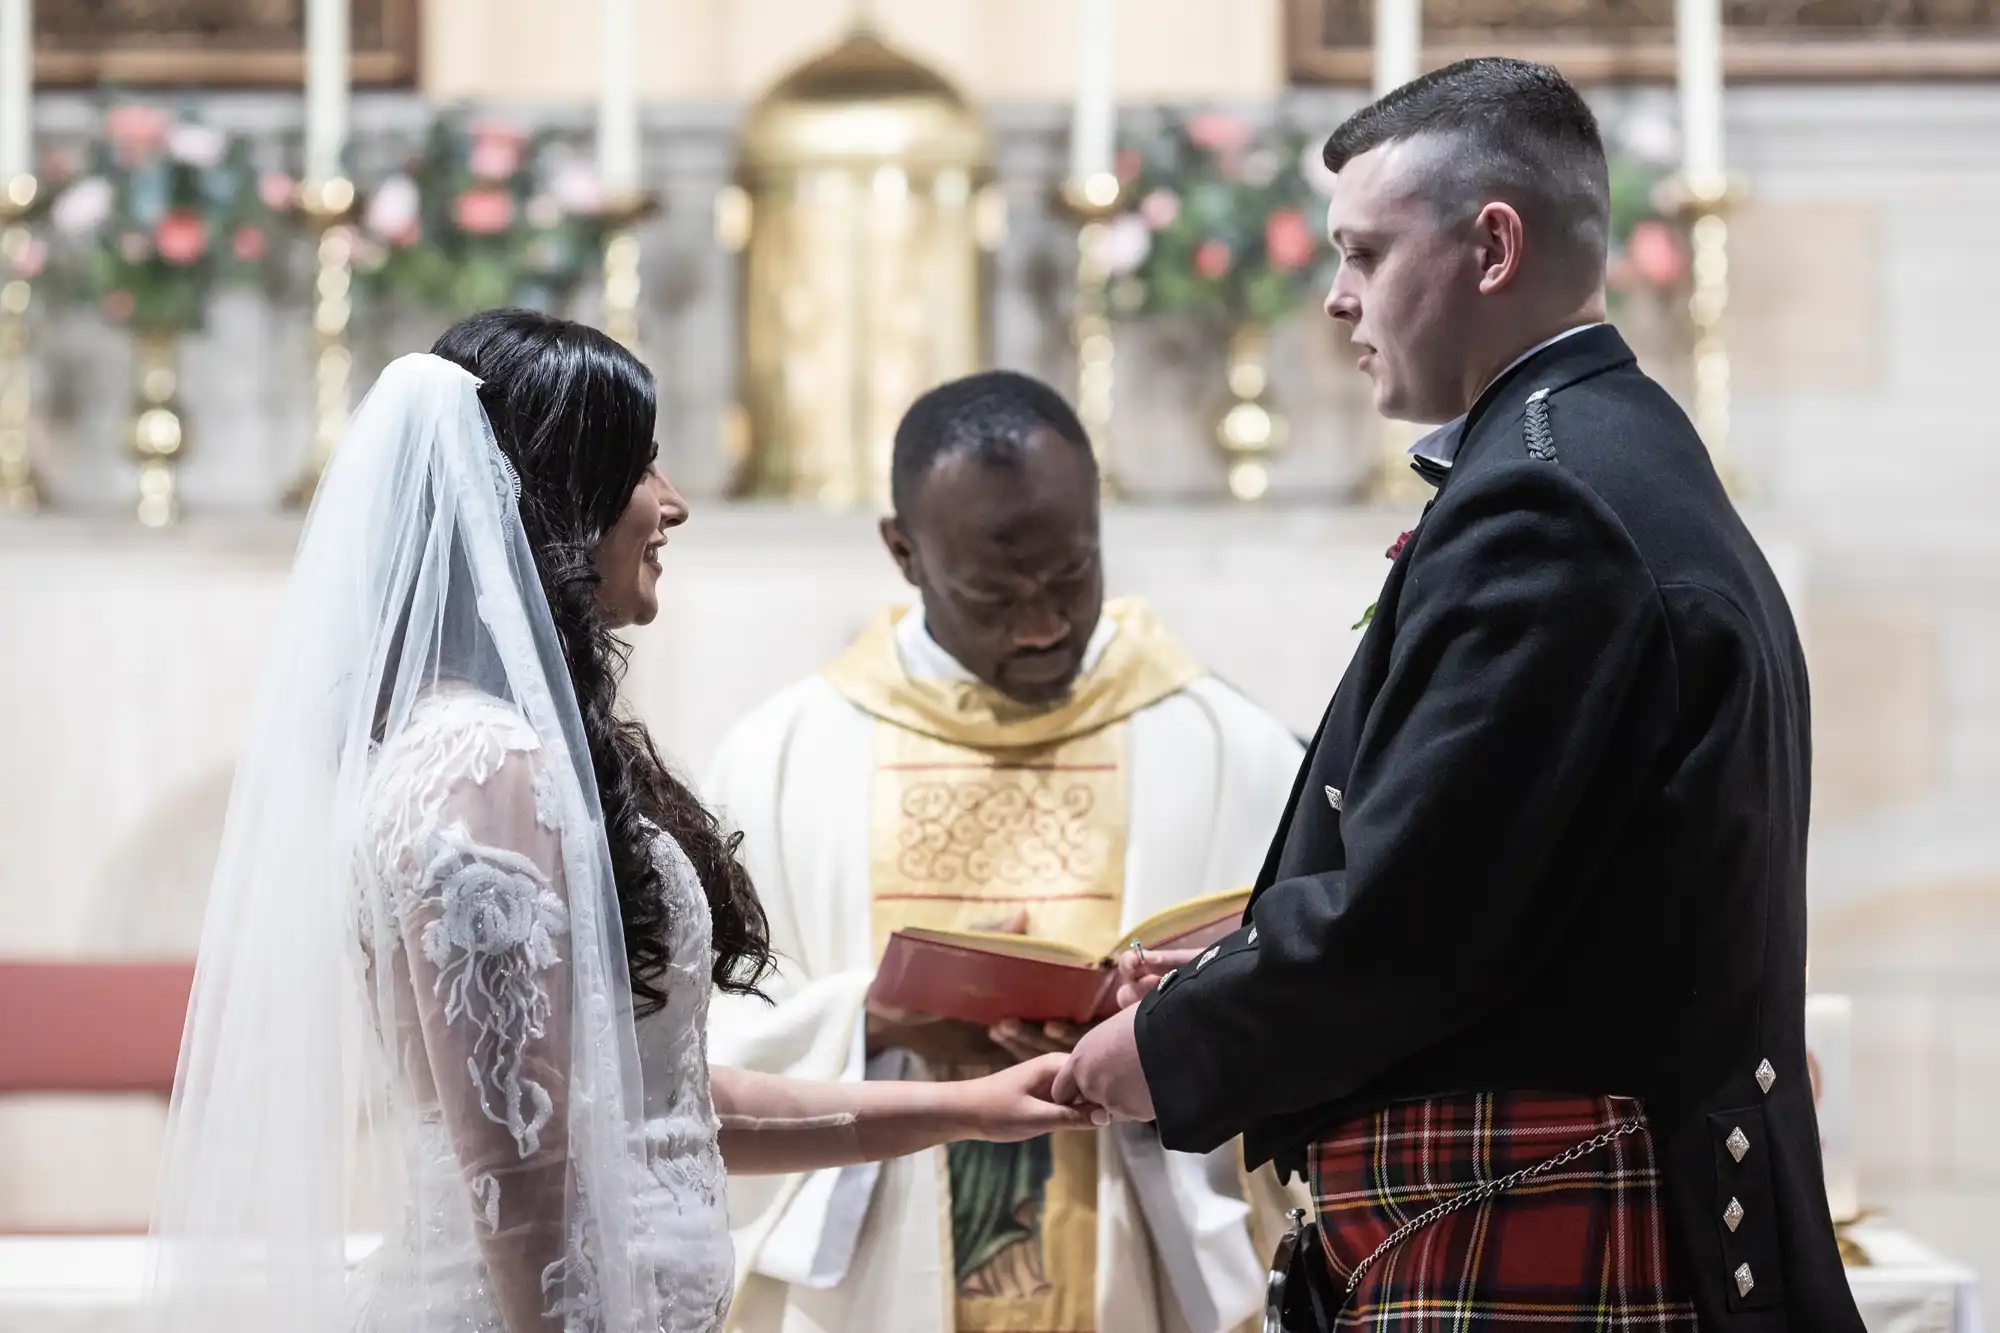 A bride and groom in wedding attire, with the groom wearing a kilt, exchange vows before a priest in a festively decorated church.